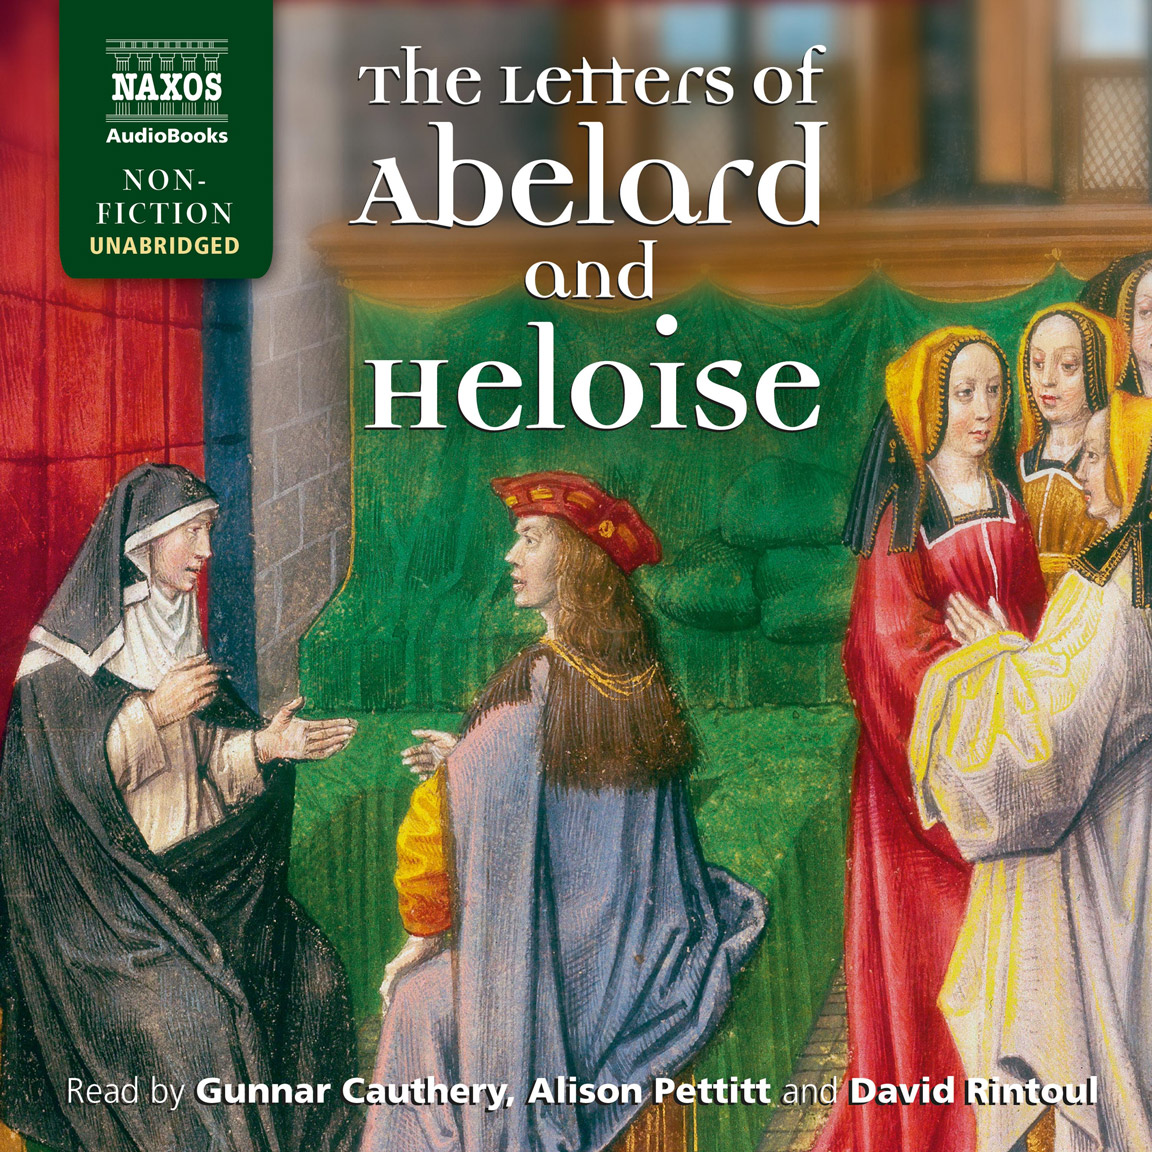 The Letters of Abelard and Heloise (unabridged)